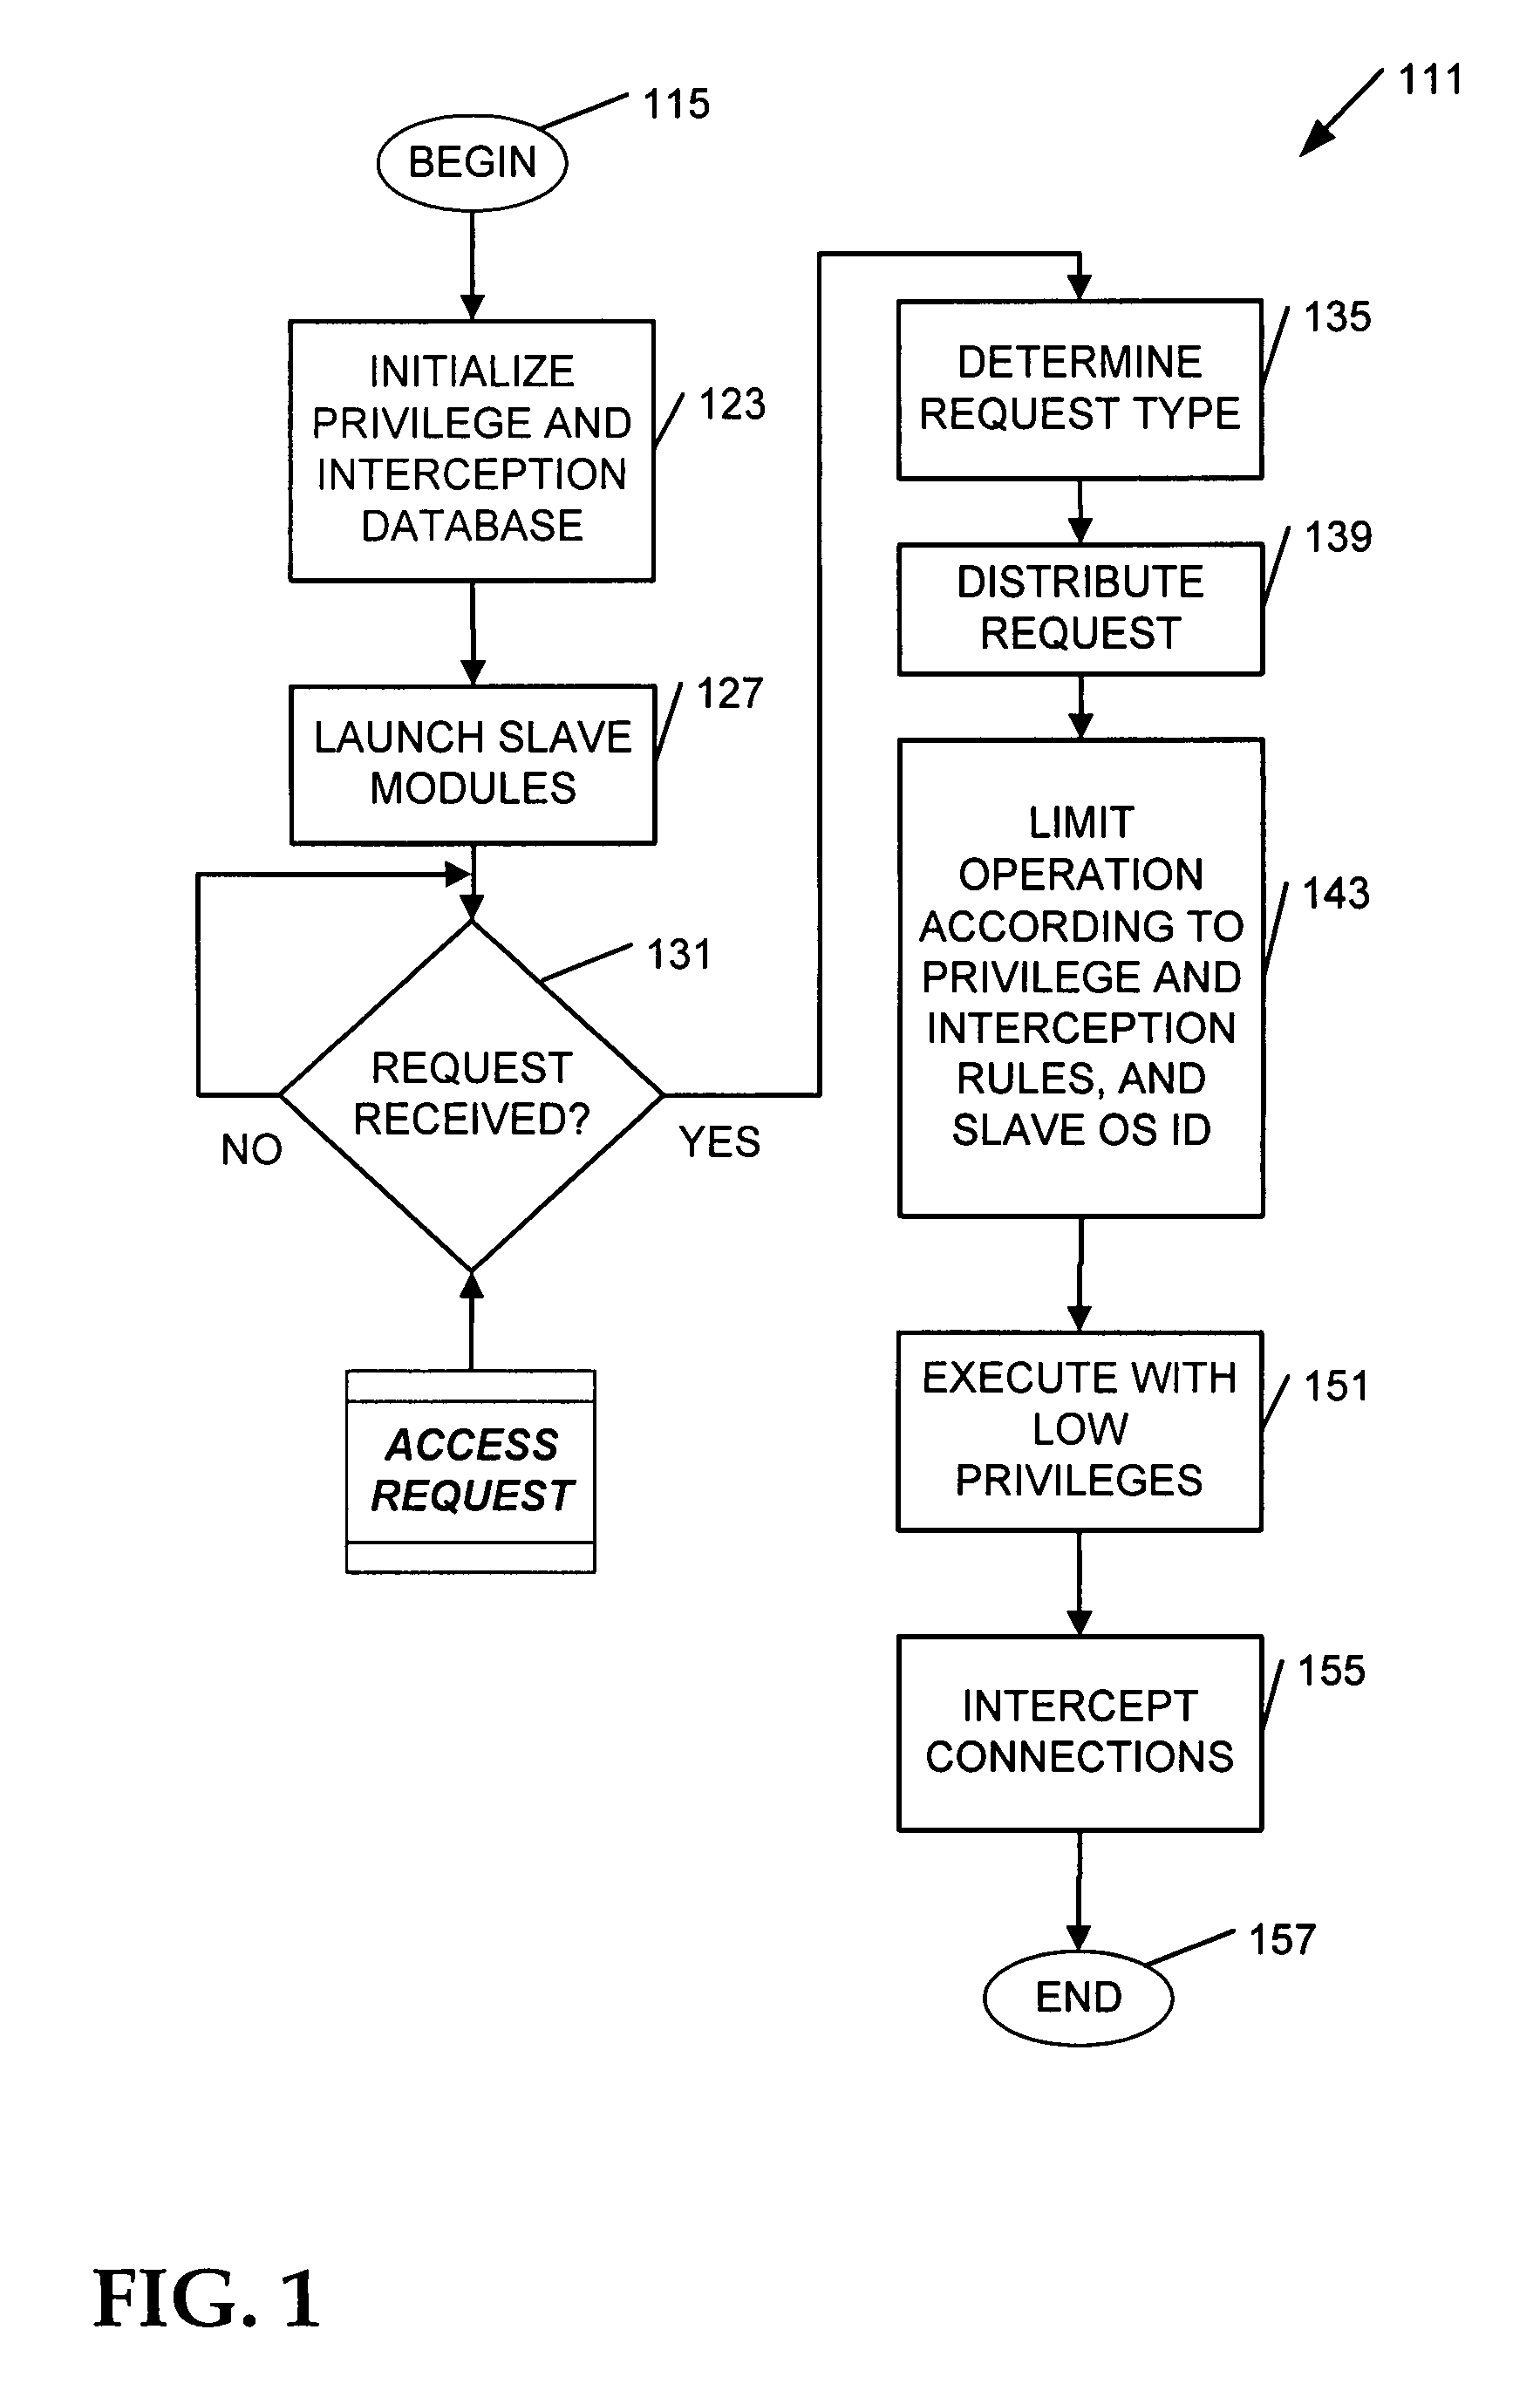 Integrated privilege separation and network interception